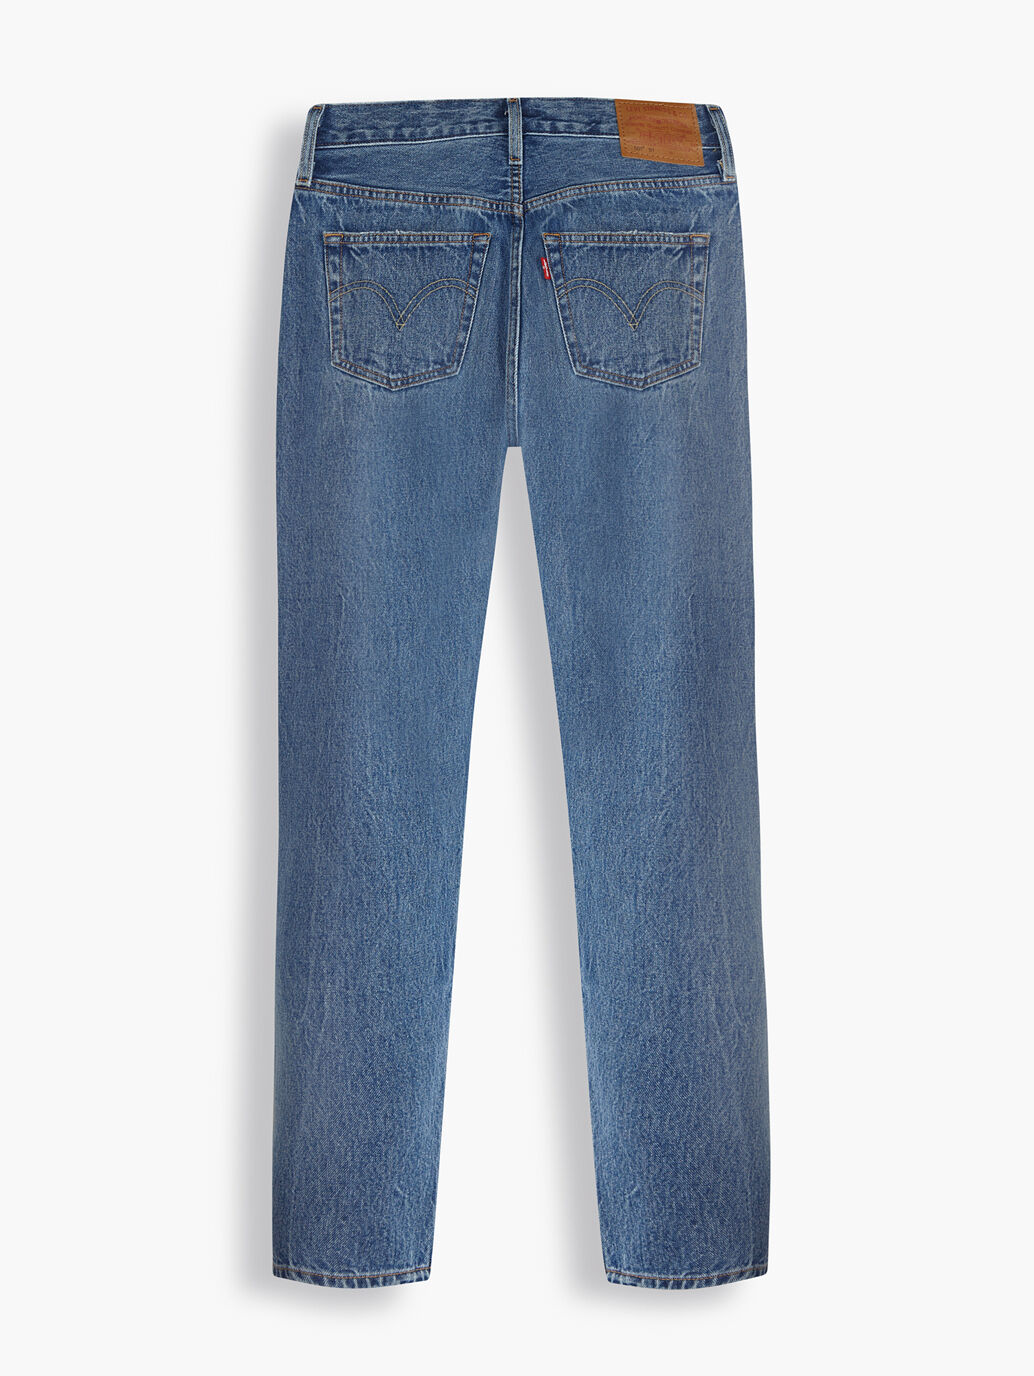 Women's Blue 501® '81 Jeans - Vintage-Inspired Fit Jeans